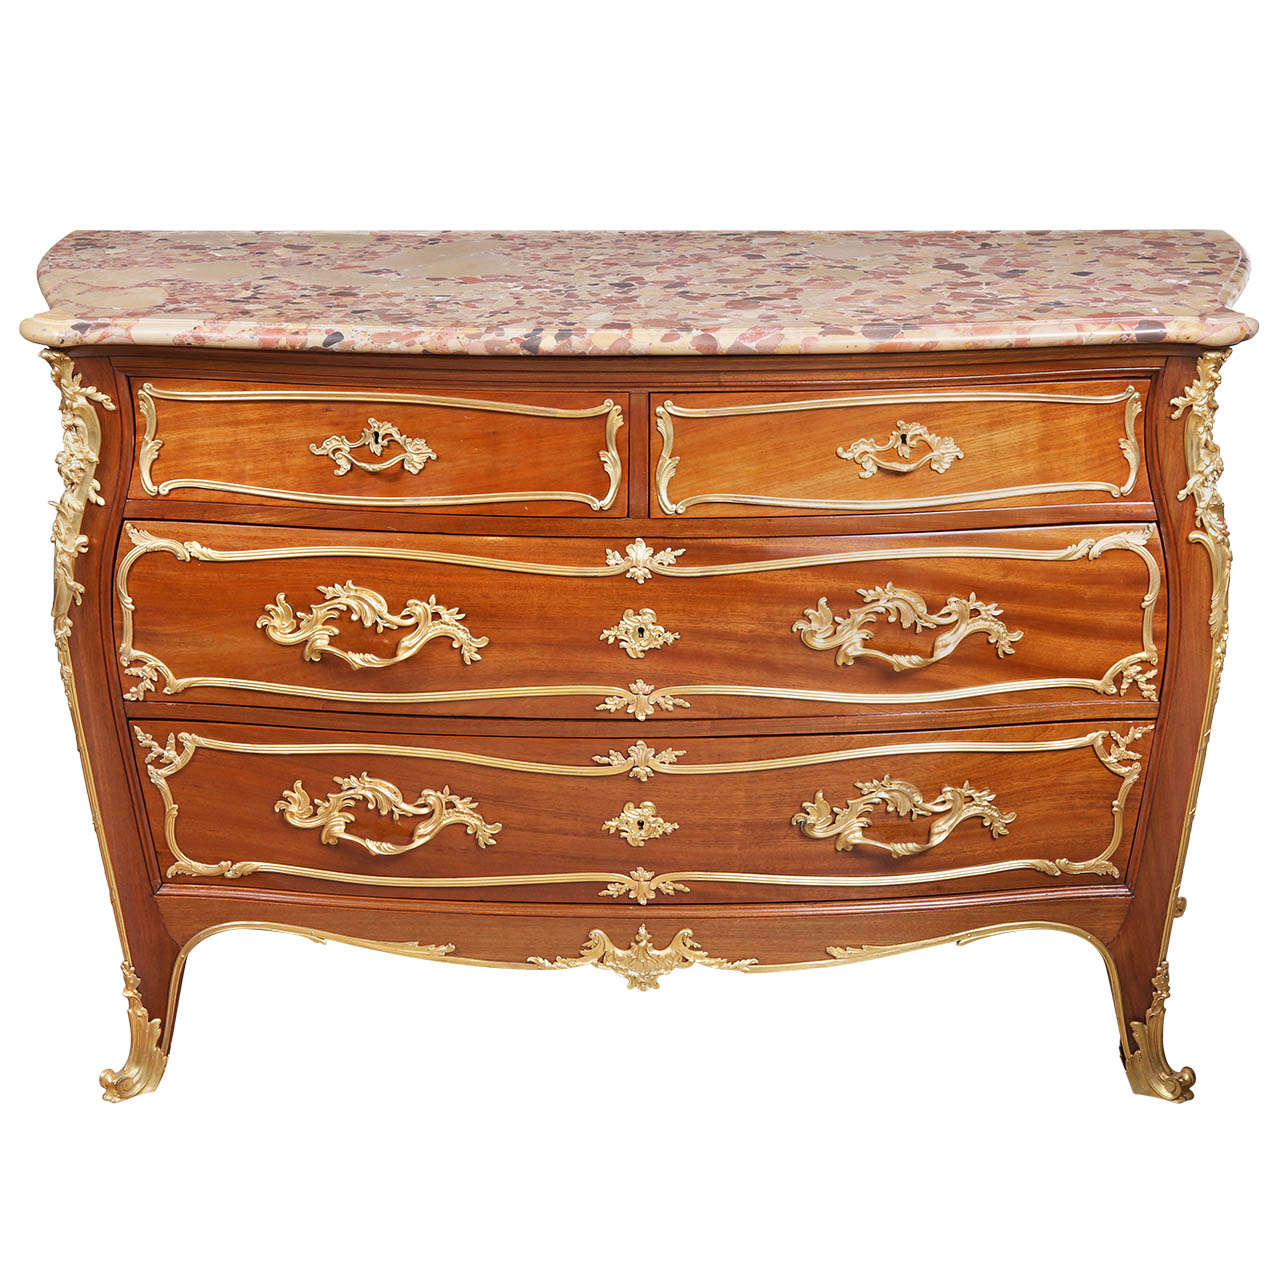 19th C Signed F Linke Kingwood Commode With Breche De Alep Marble Top